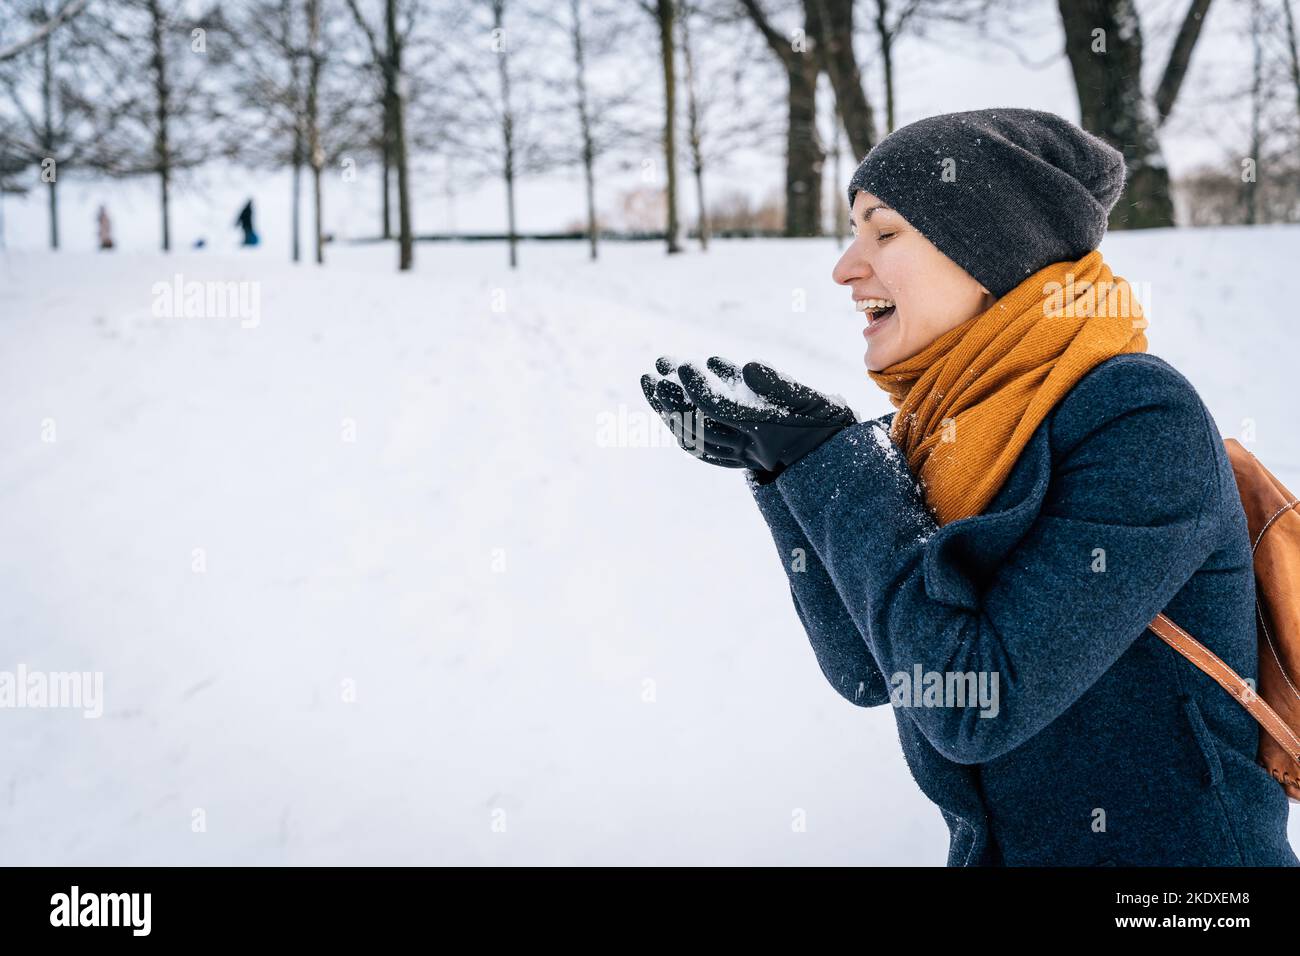 A young woman in warm winter clothes laughs looking at the snow in her palms Stock Photo